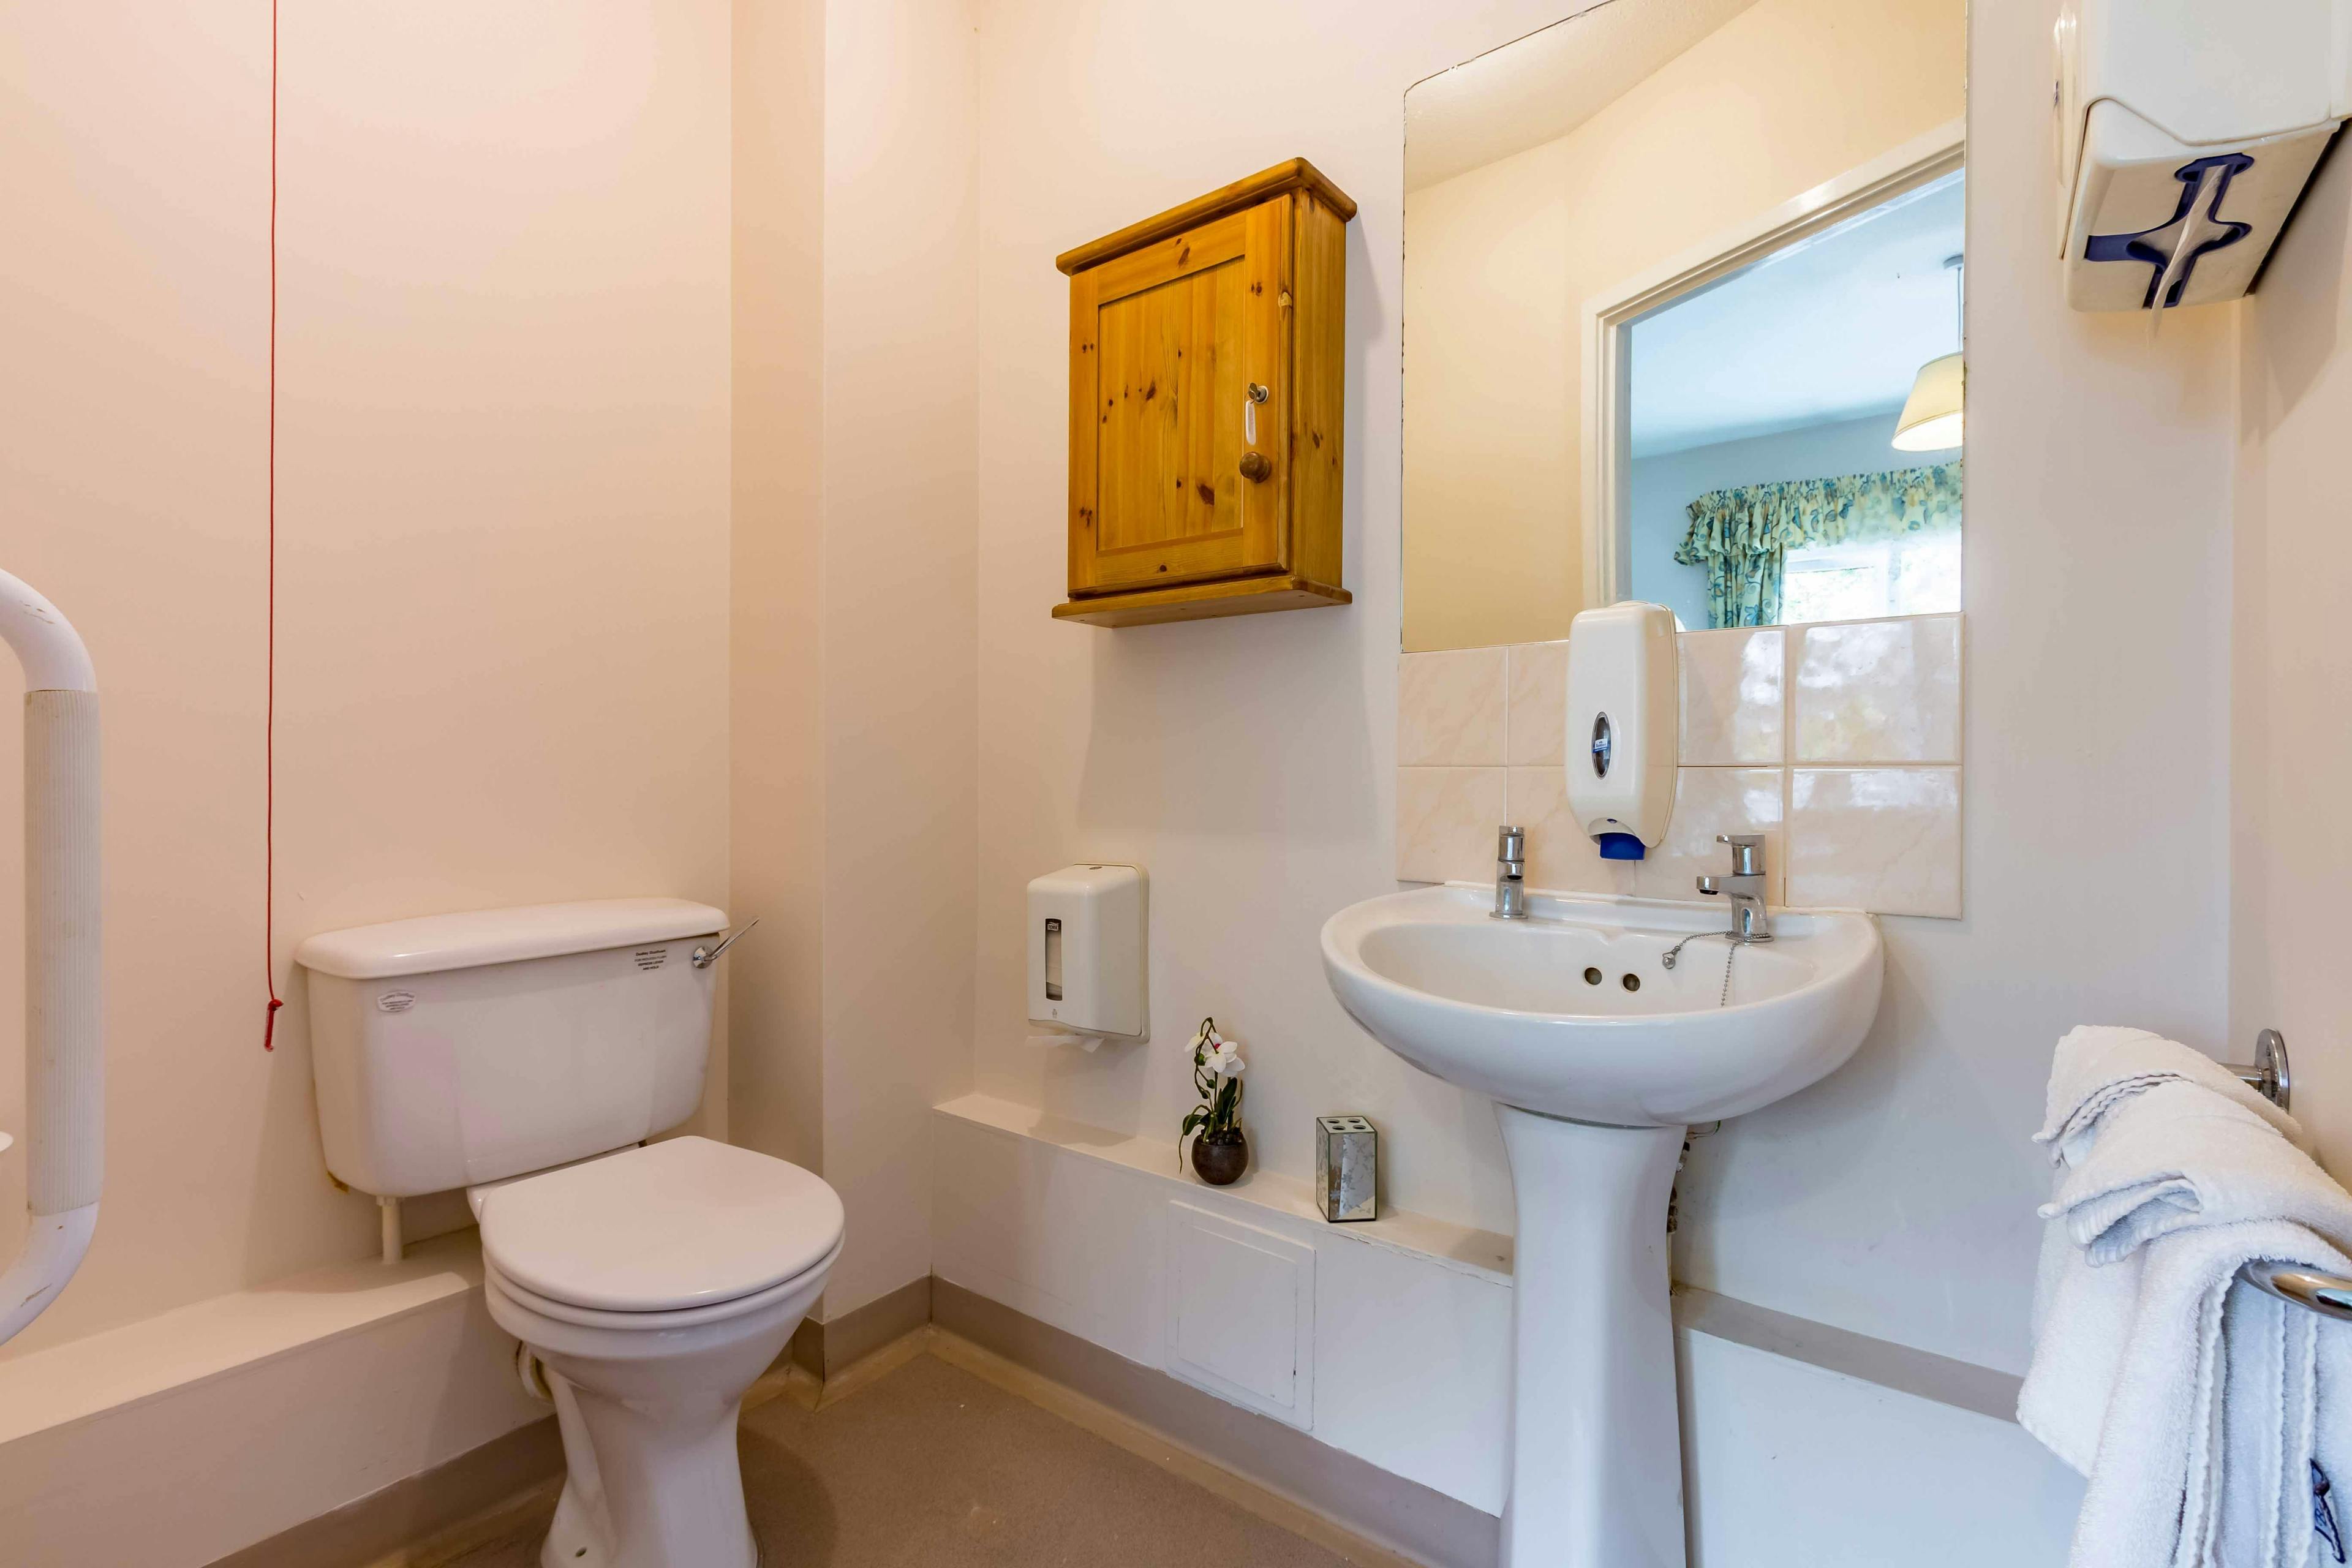 Bathroom at Shelburne Lodge Care Home in High Wycombe, Buckinghamshire